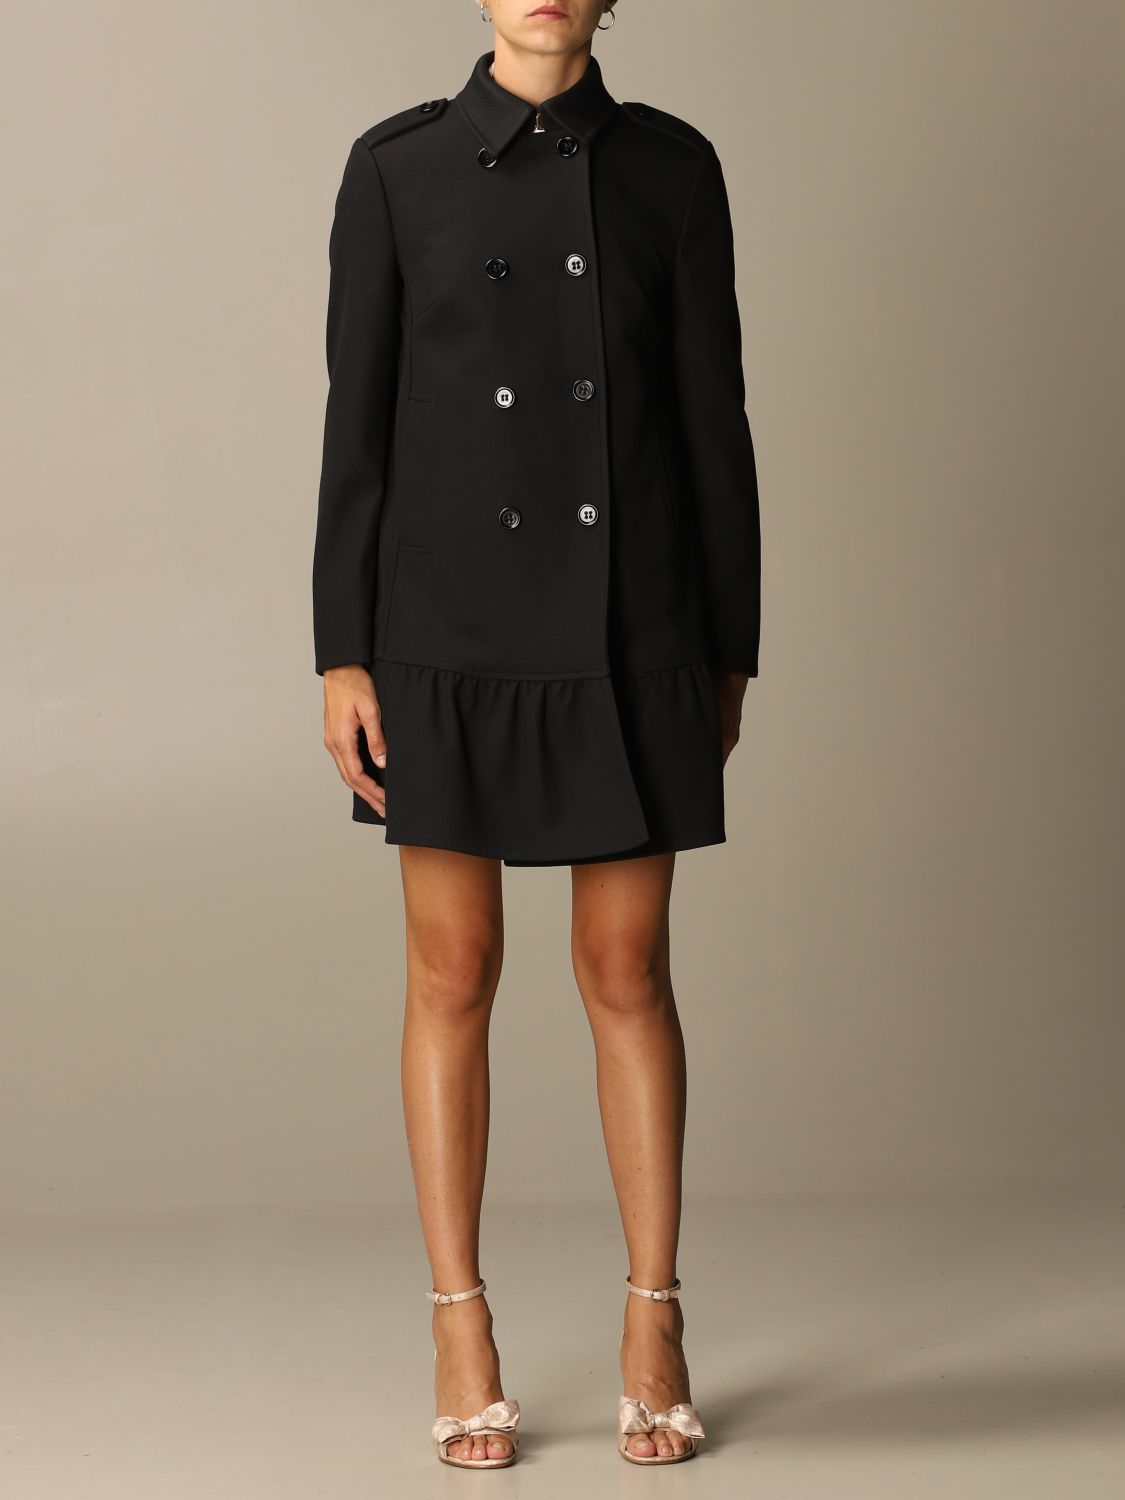 RED VALENTINO: double-breasted coat - Black | Red Valentino coat UR3CAB95 1Y1 on GIGLIO.COM